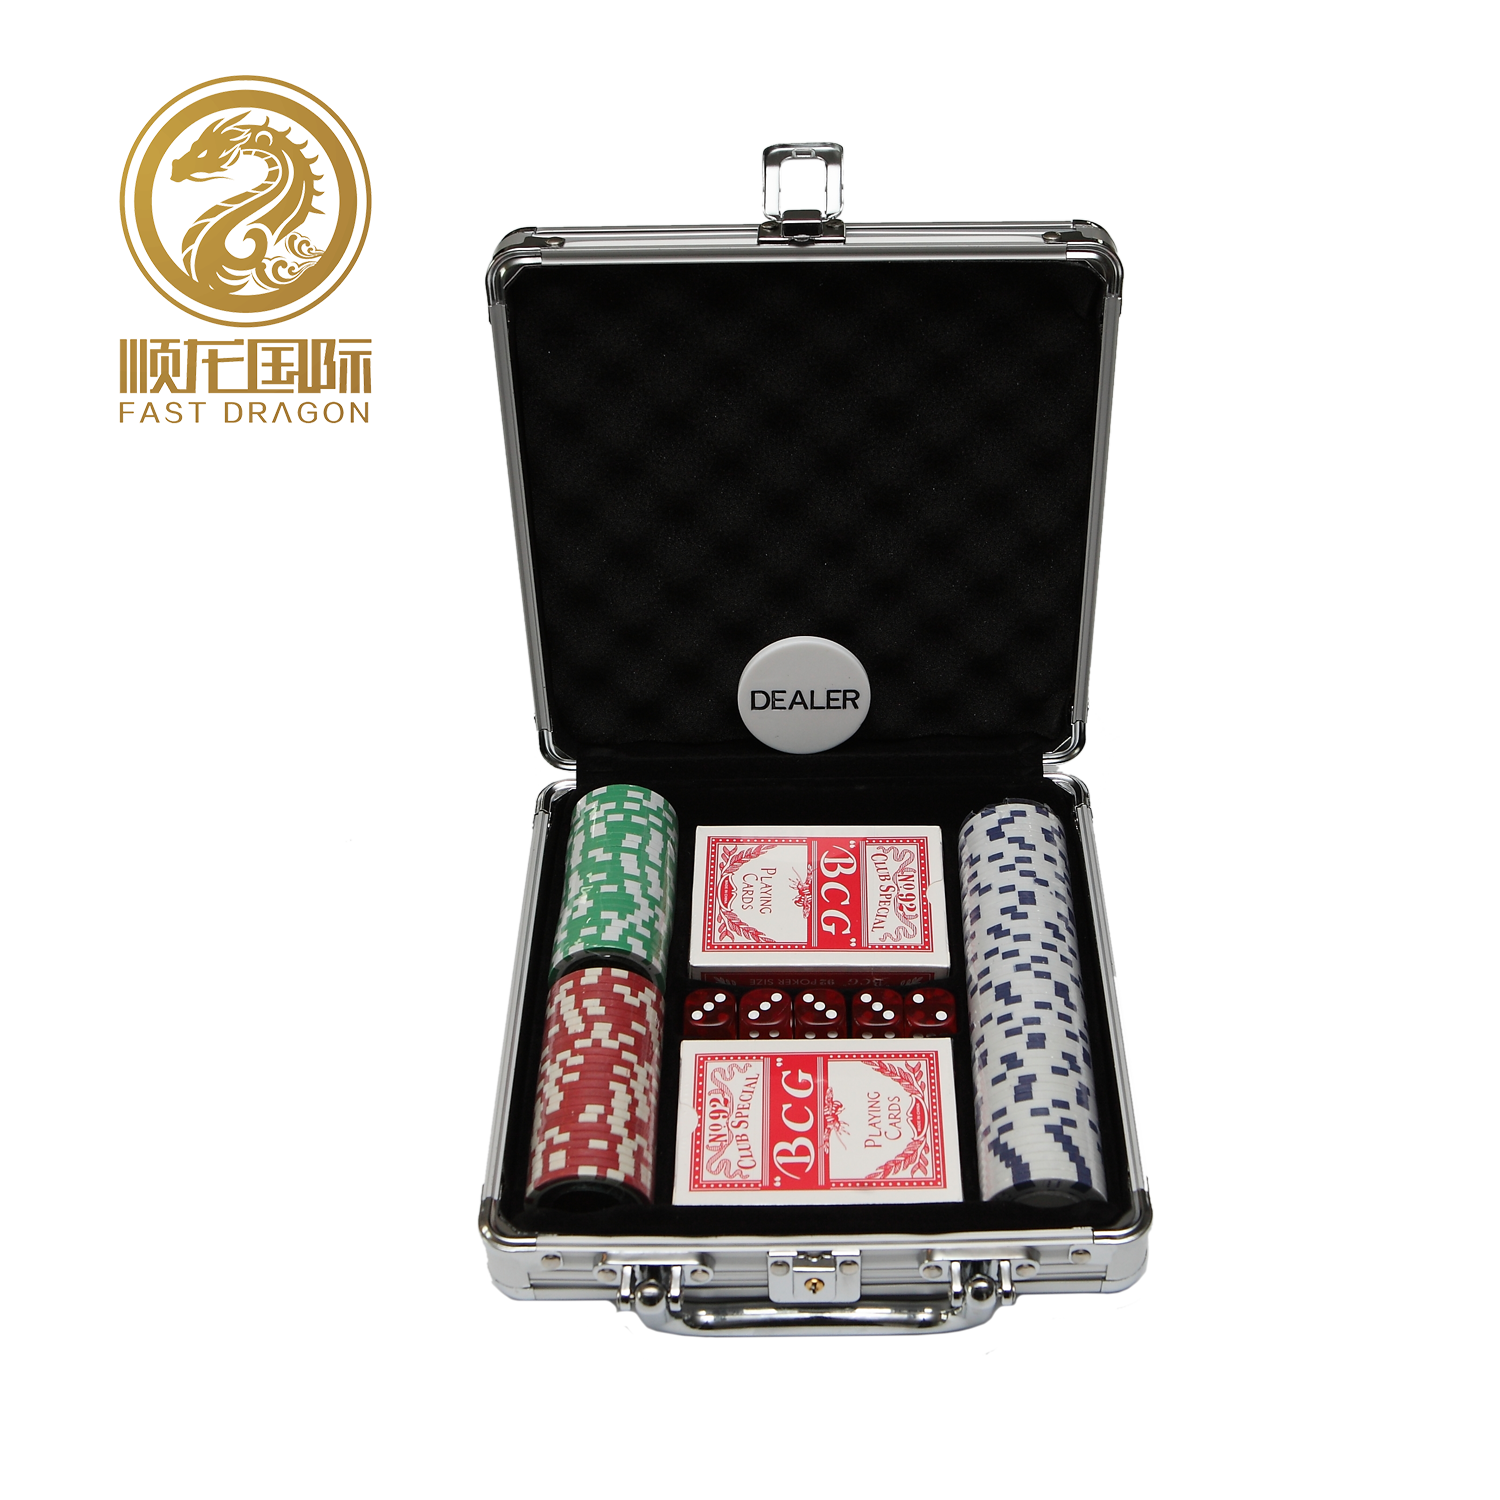 DRA-GB2002 11.5g ABS Casino Texas Poker Chips Sets with Metal Box 